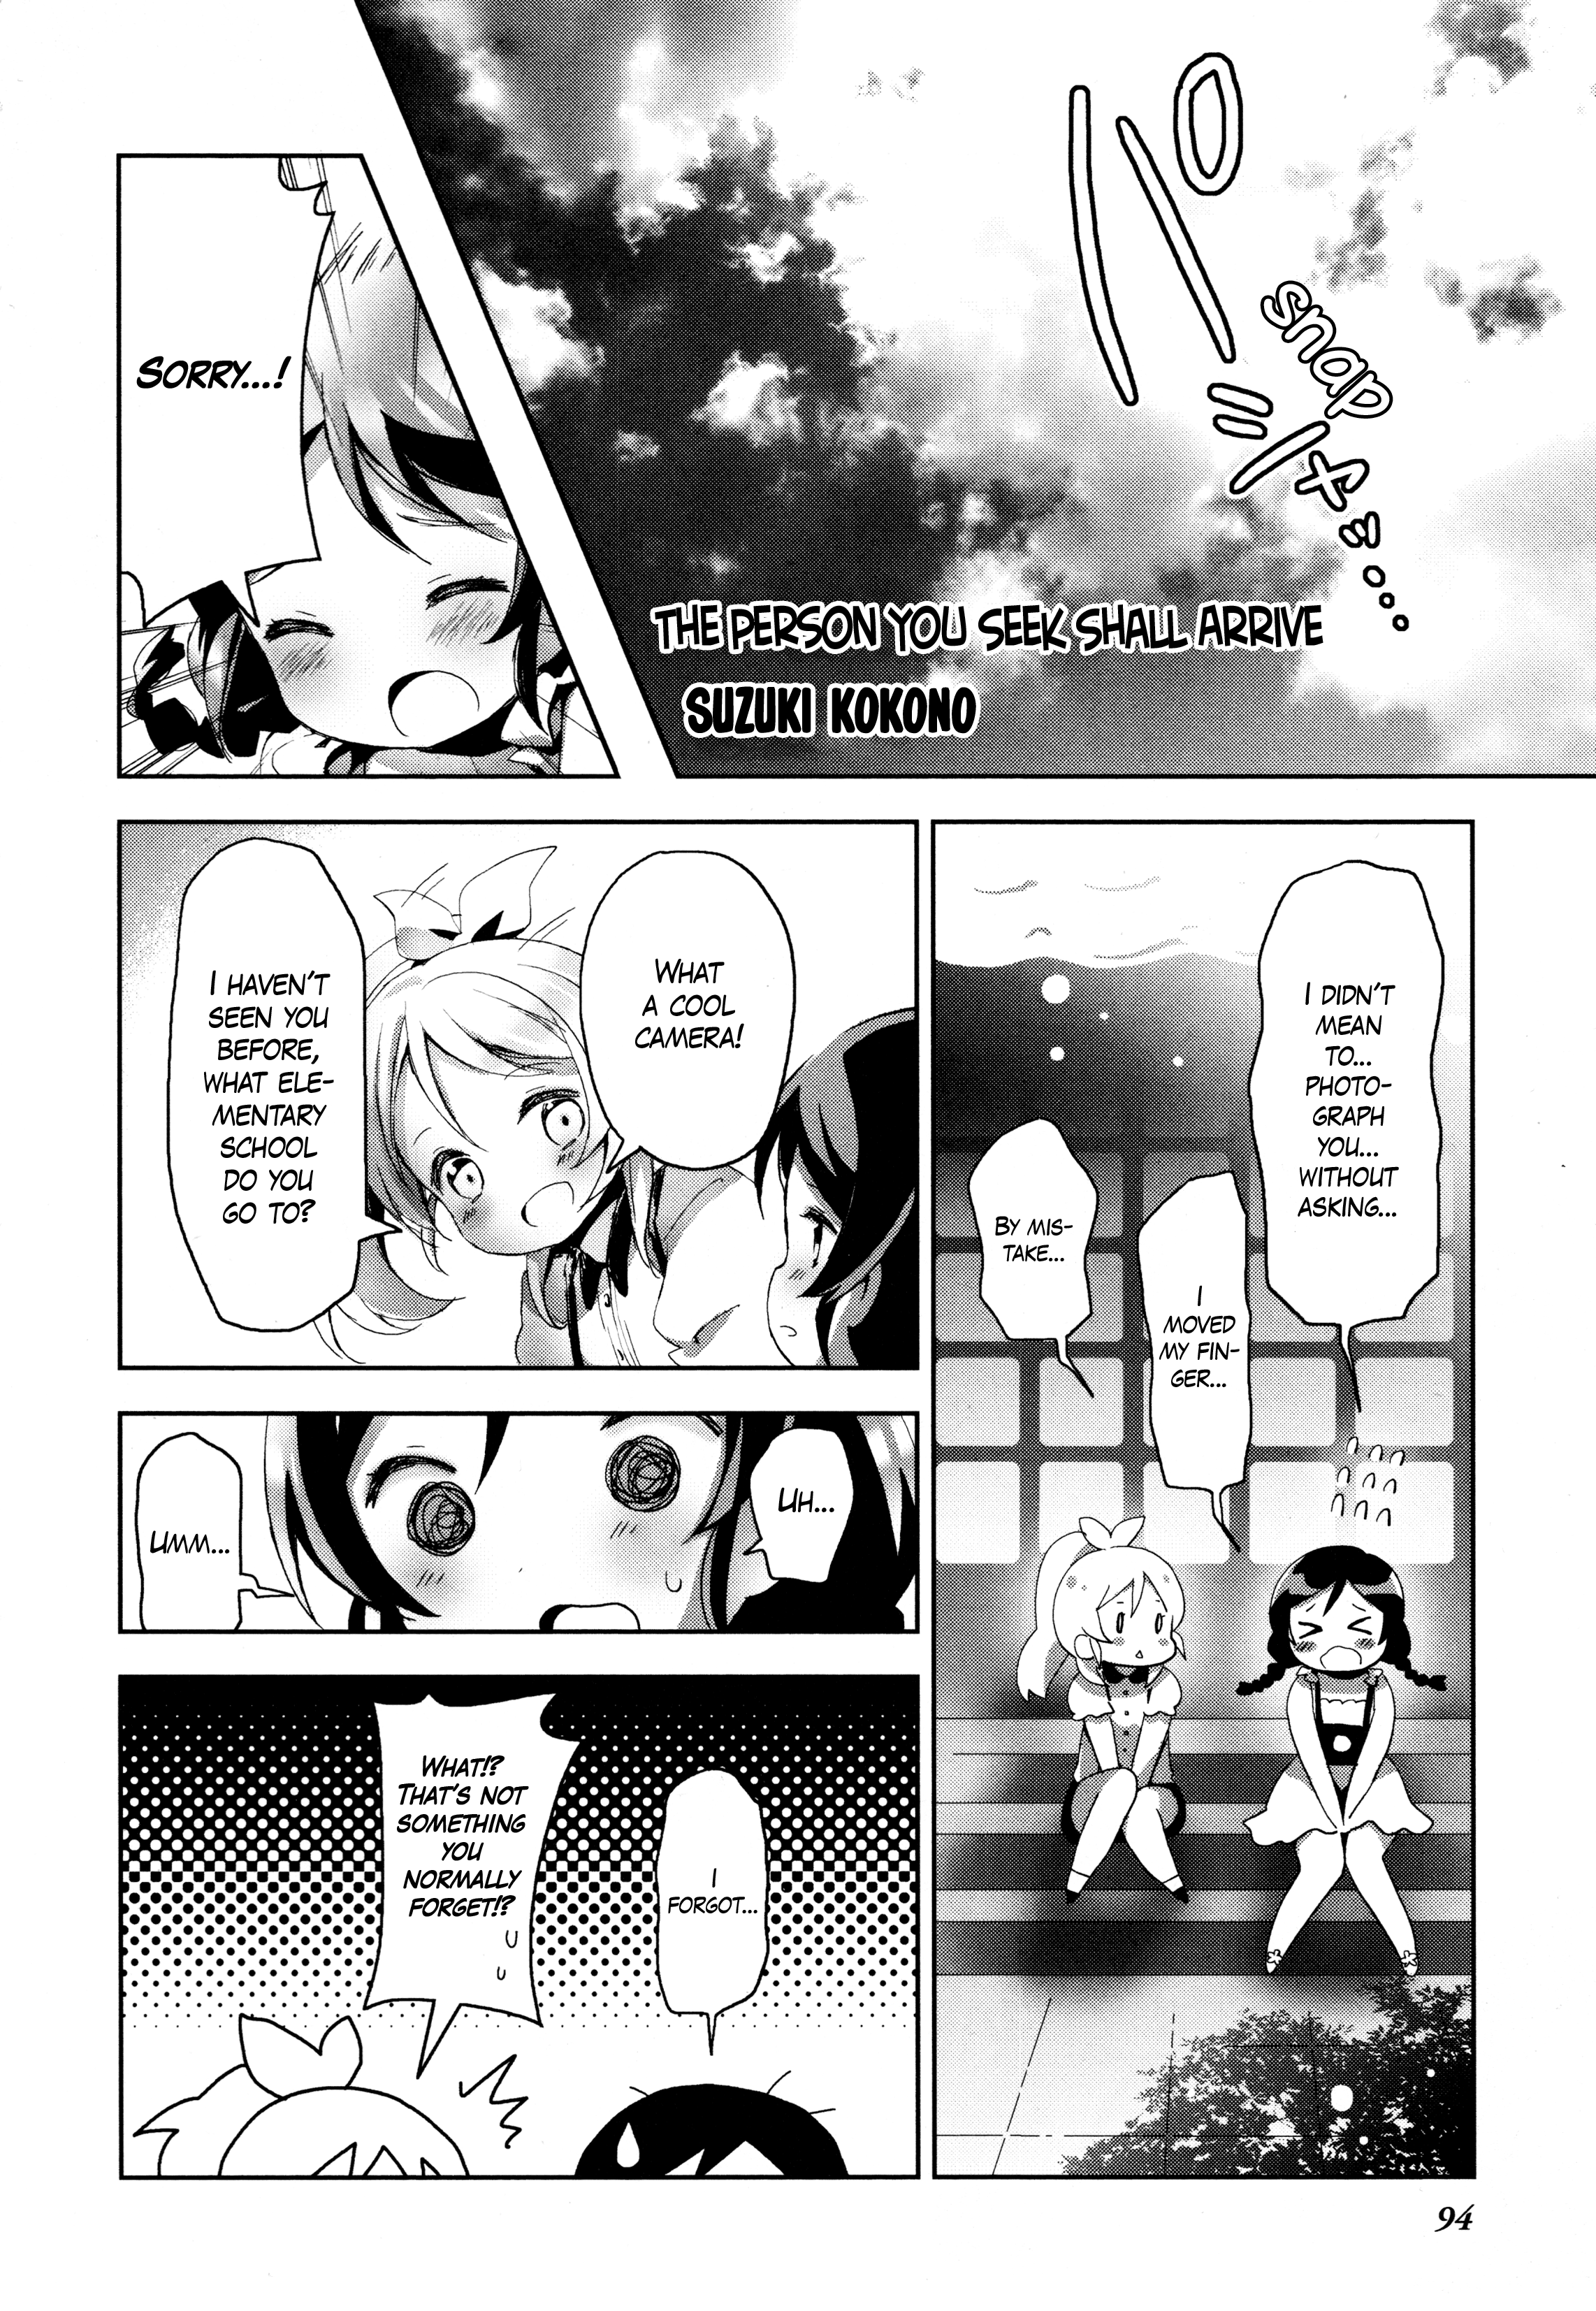 Love Live! Comic Anthology Μ's Sweet Memories Vol.1 Chapter 8: The Person You Seek Shall Arrive - Picture 2